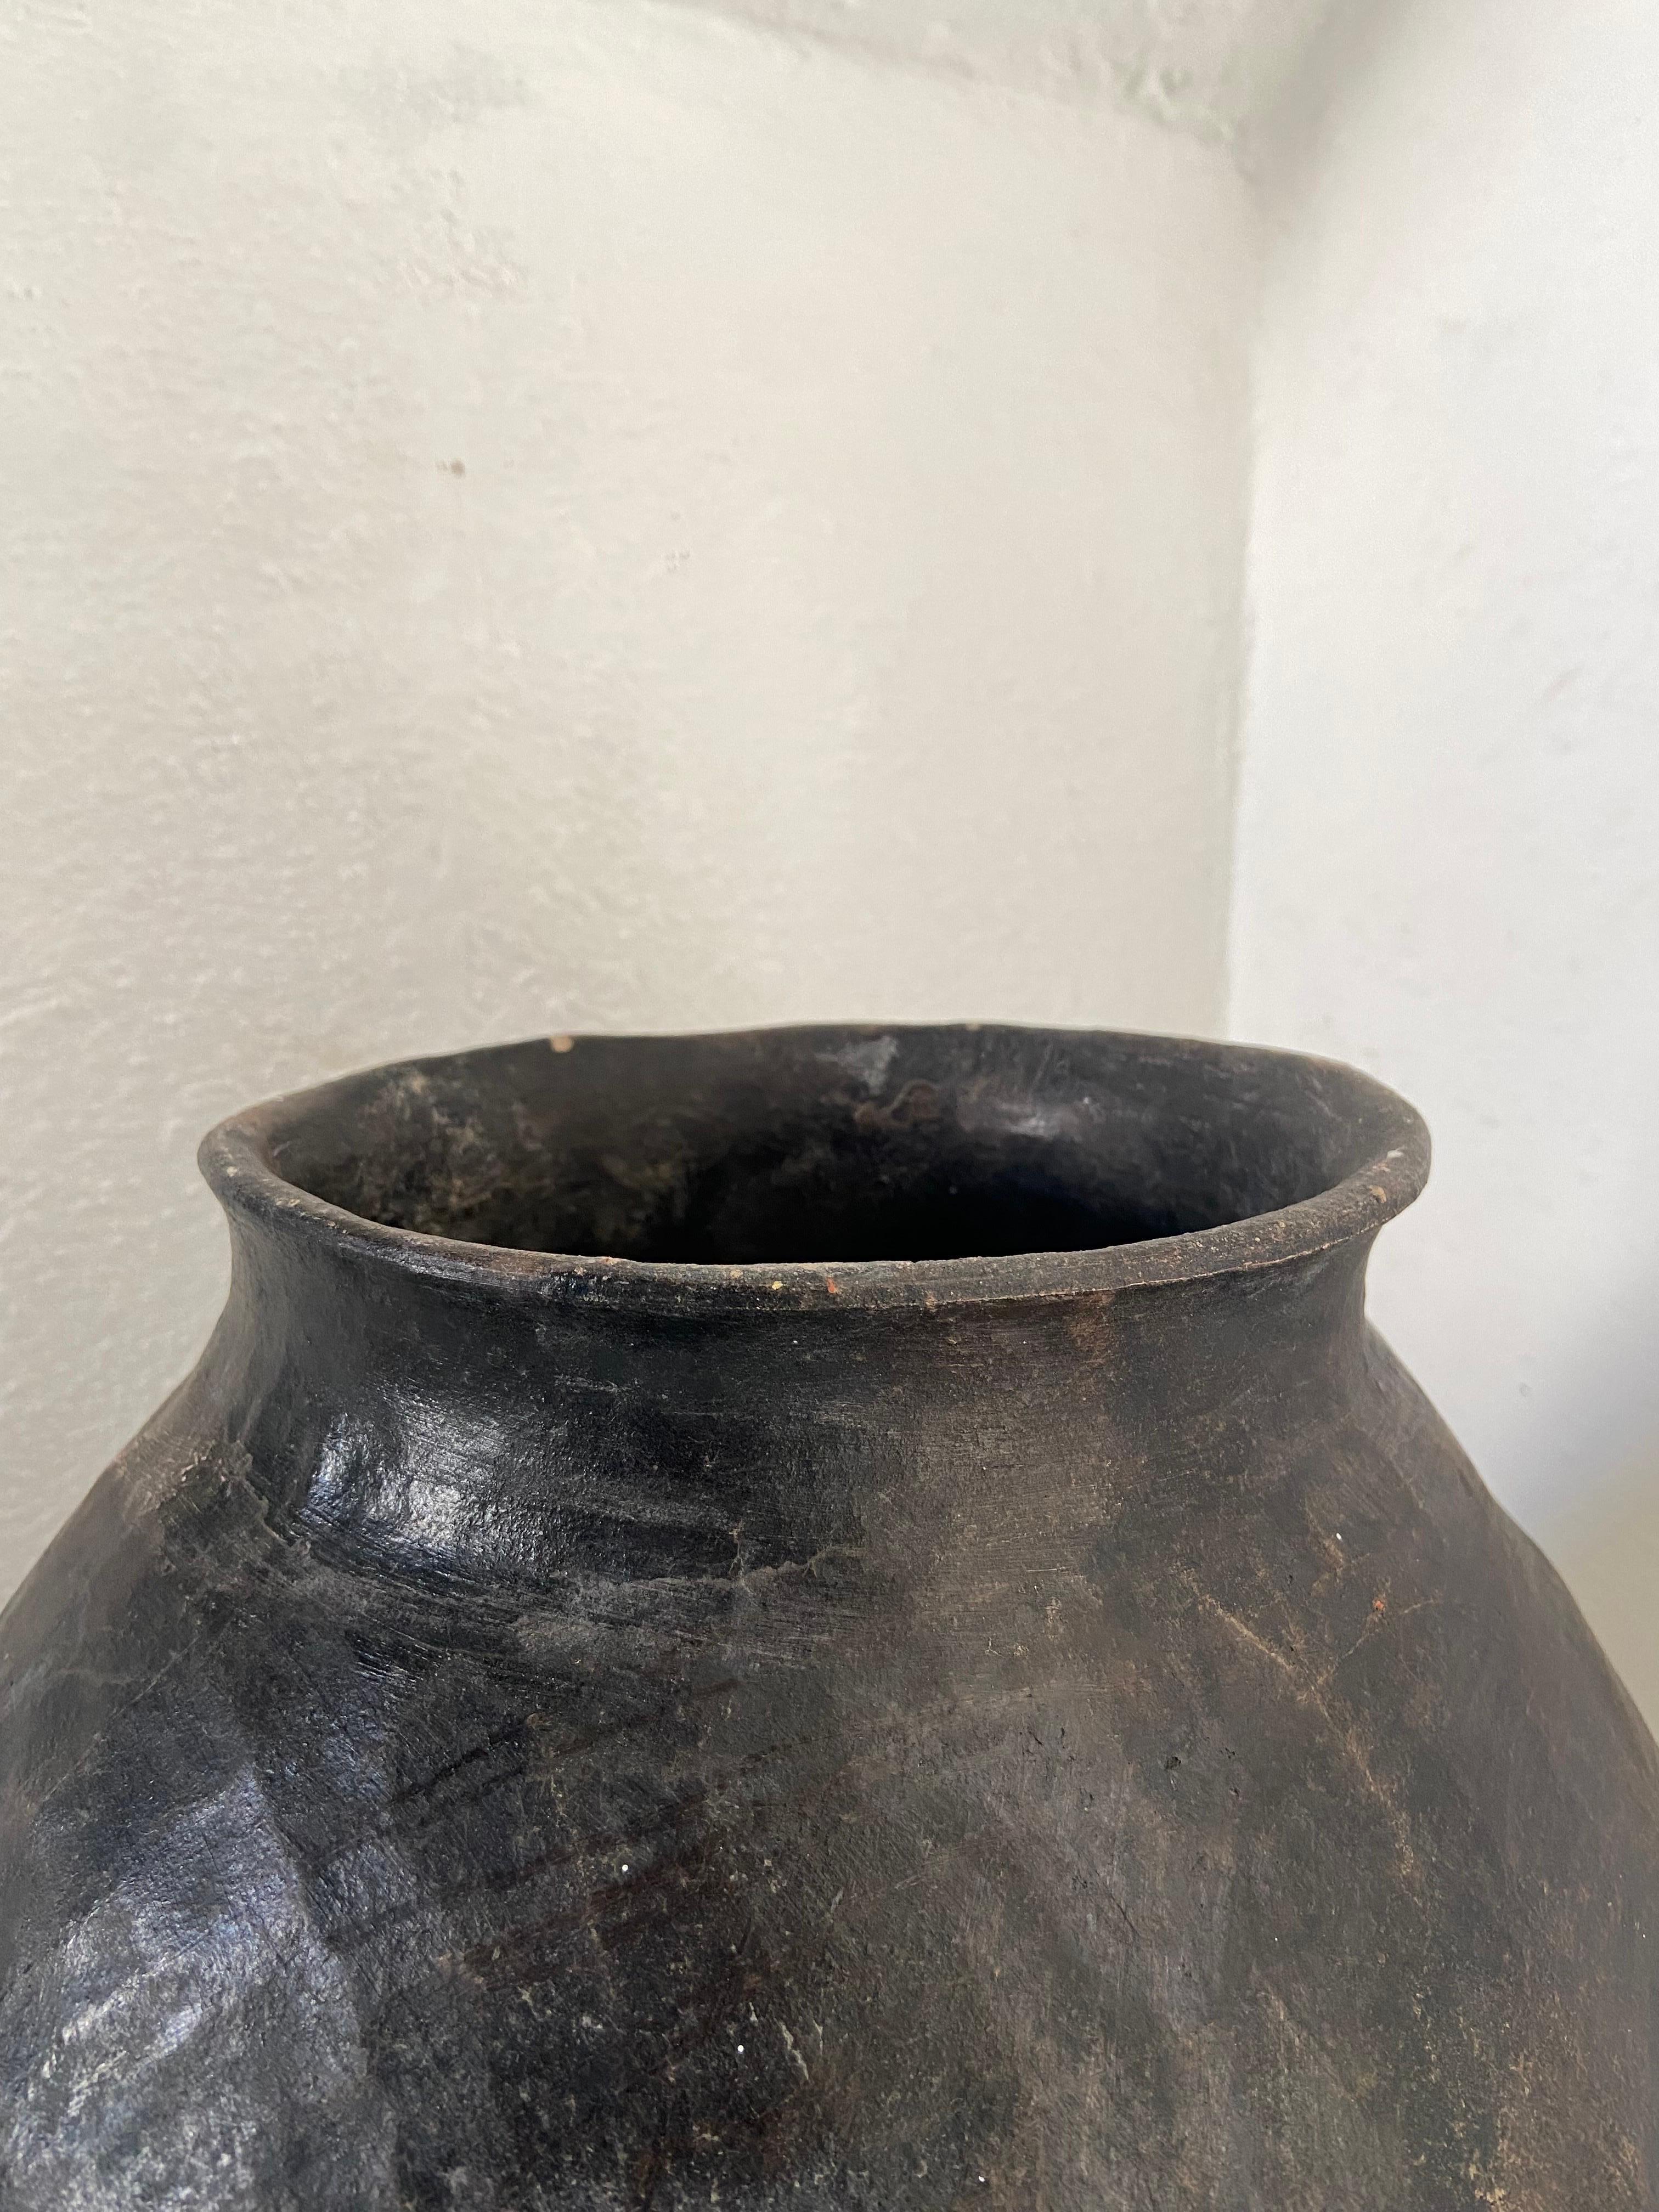 Tarahumara water vessel from Southwestern Chihuahua, Mexico, circa 1920s. The dark color of the clay used to create this pot is extremely rare. The Tarahumara, or Rarámuri, are indigenous peoples who live along the southern border of Chihuahua and